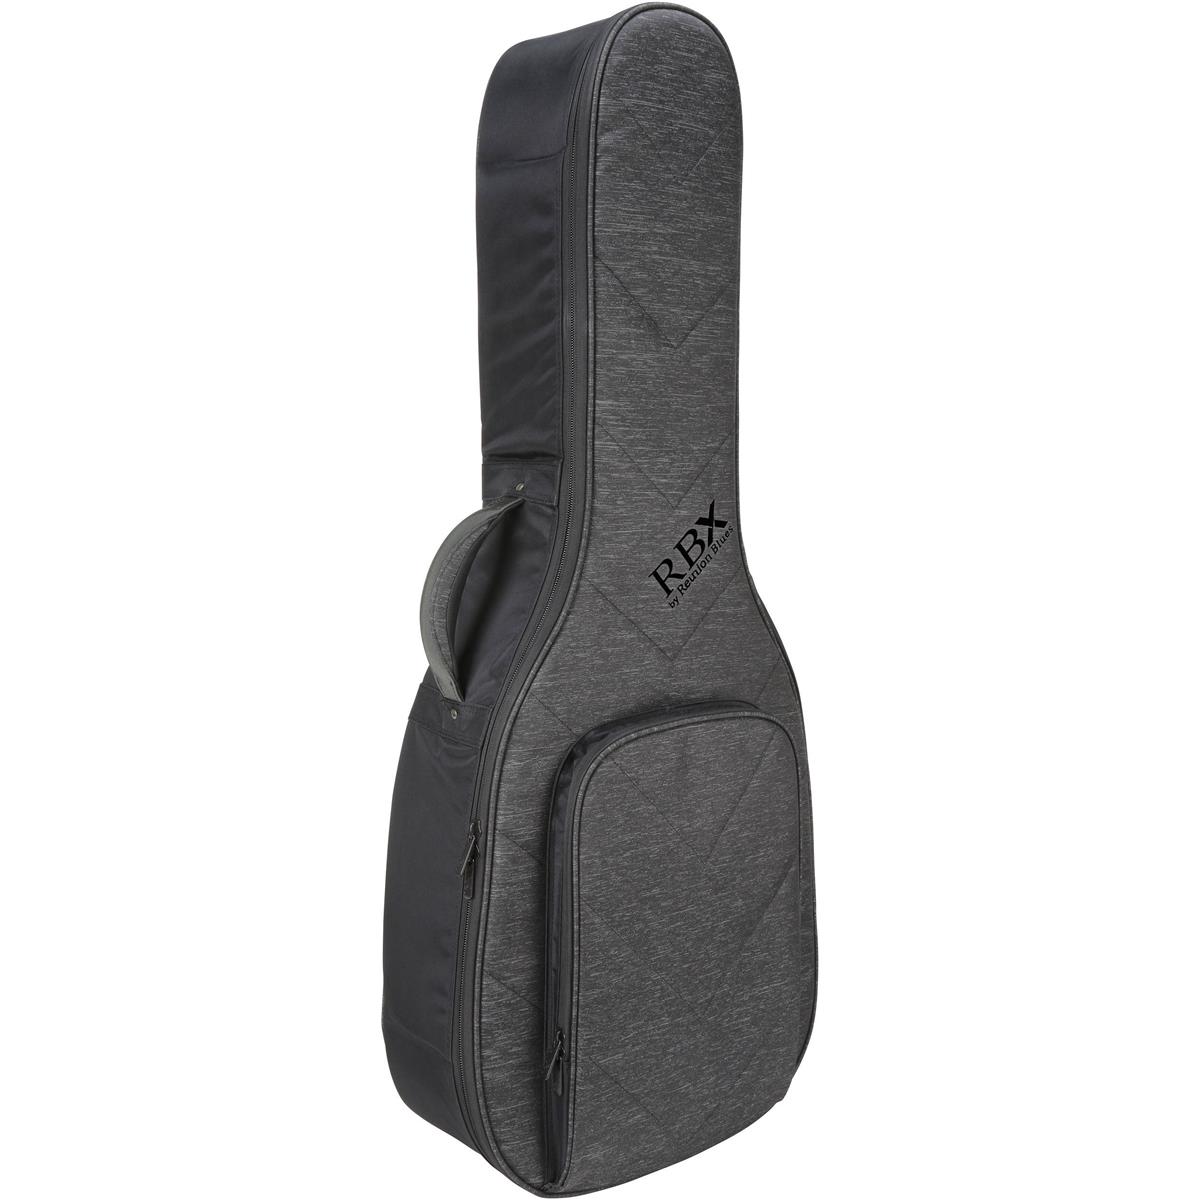 Image of Reunion Blues RBX Oxford Series Gig Bag for Dreadnought Acoustic Guitar